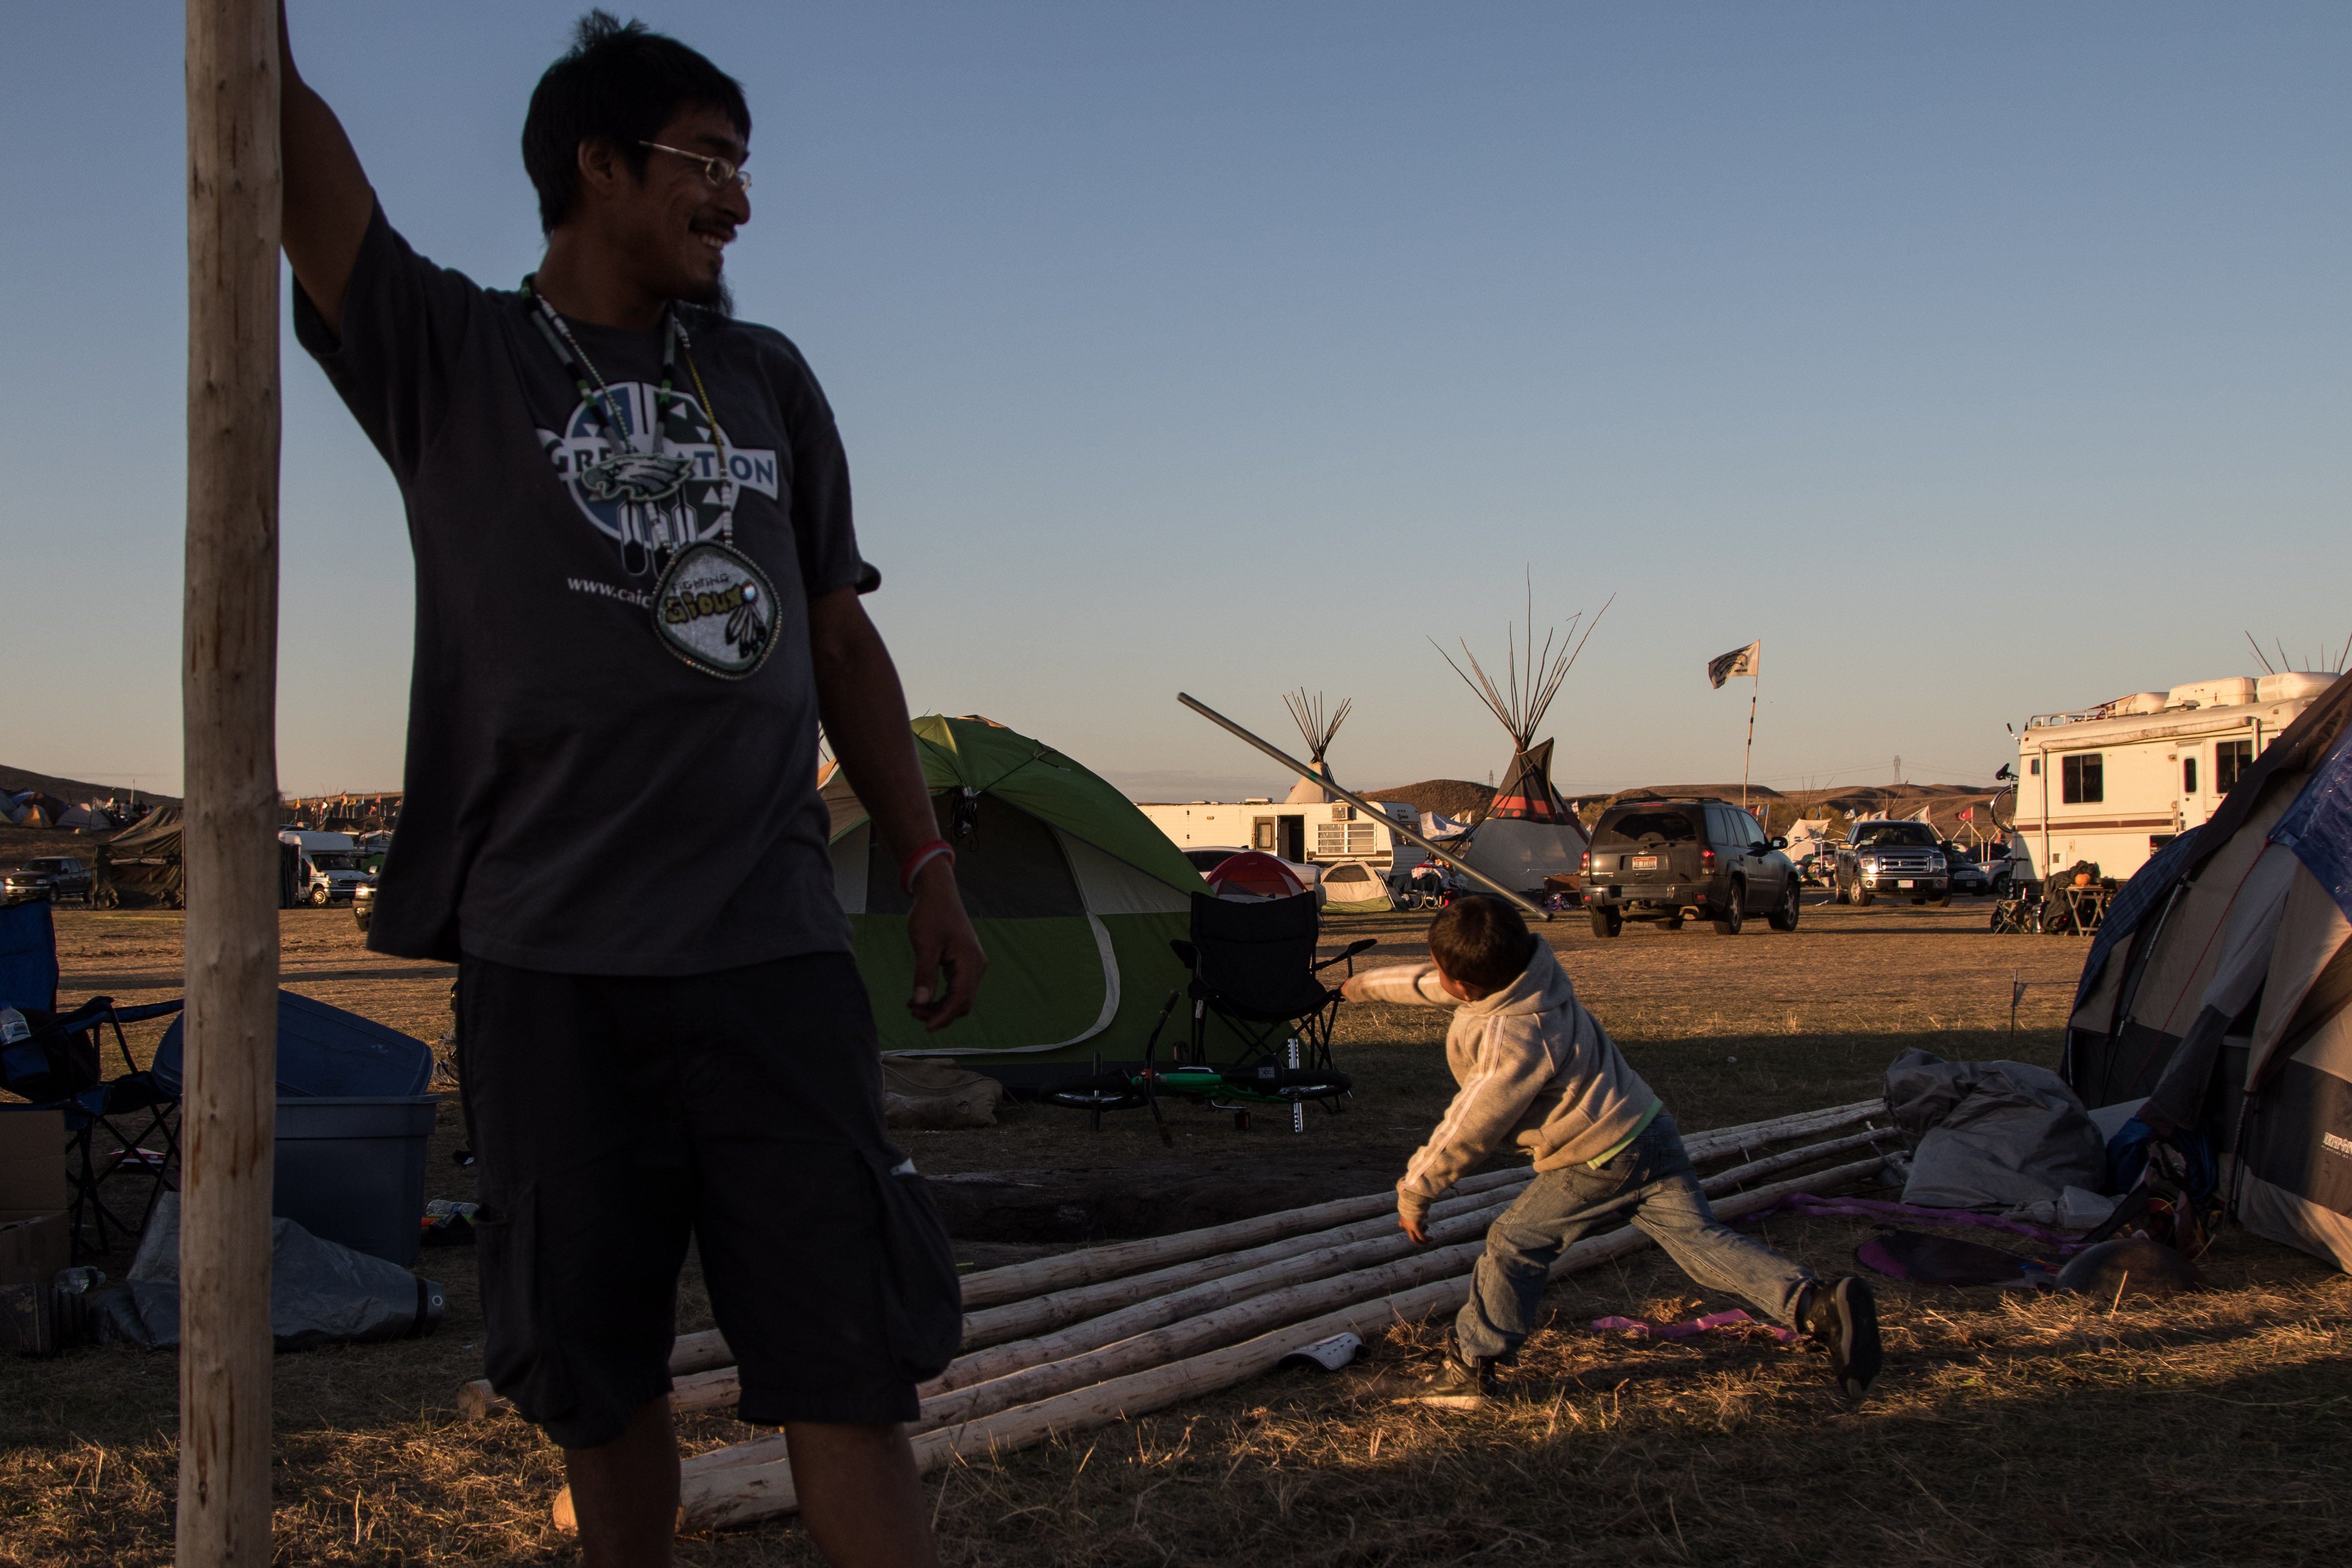 Photos: How to build a teepee at DAPL